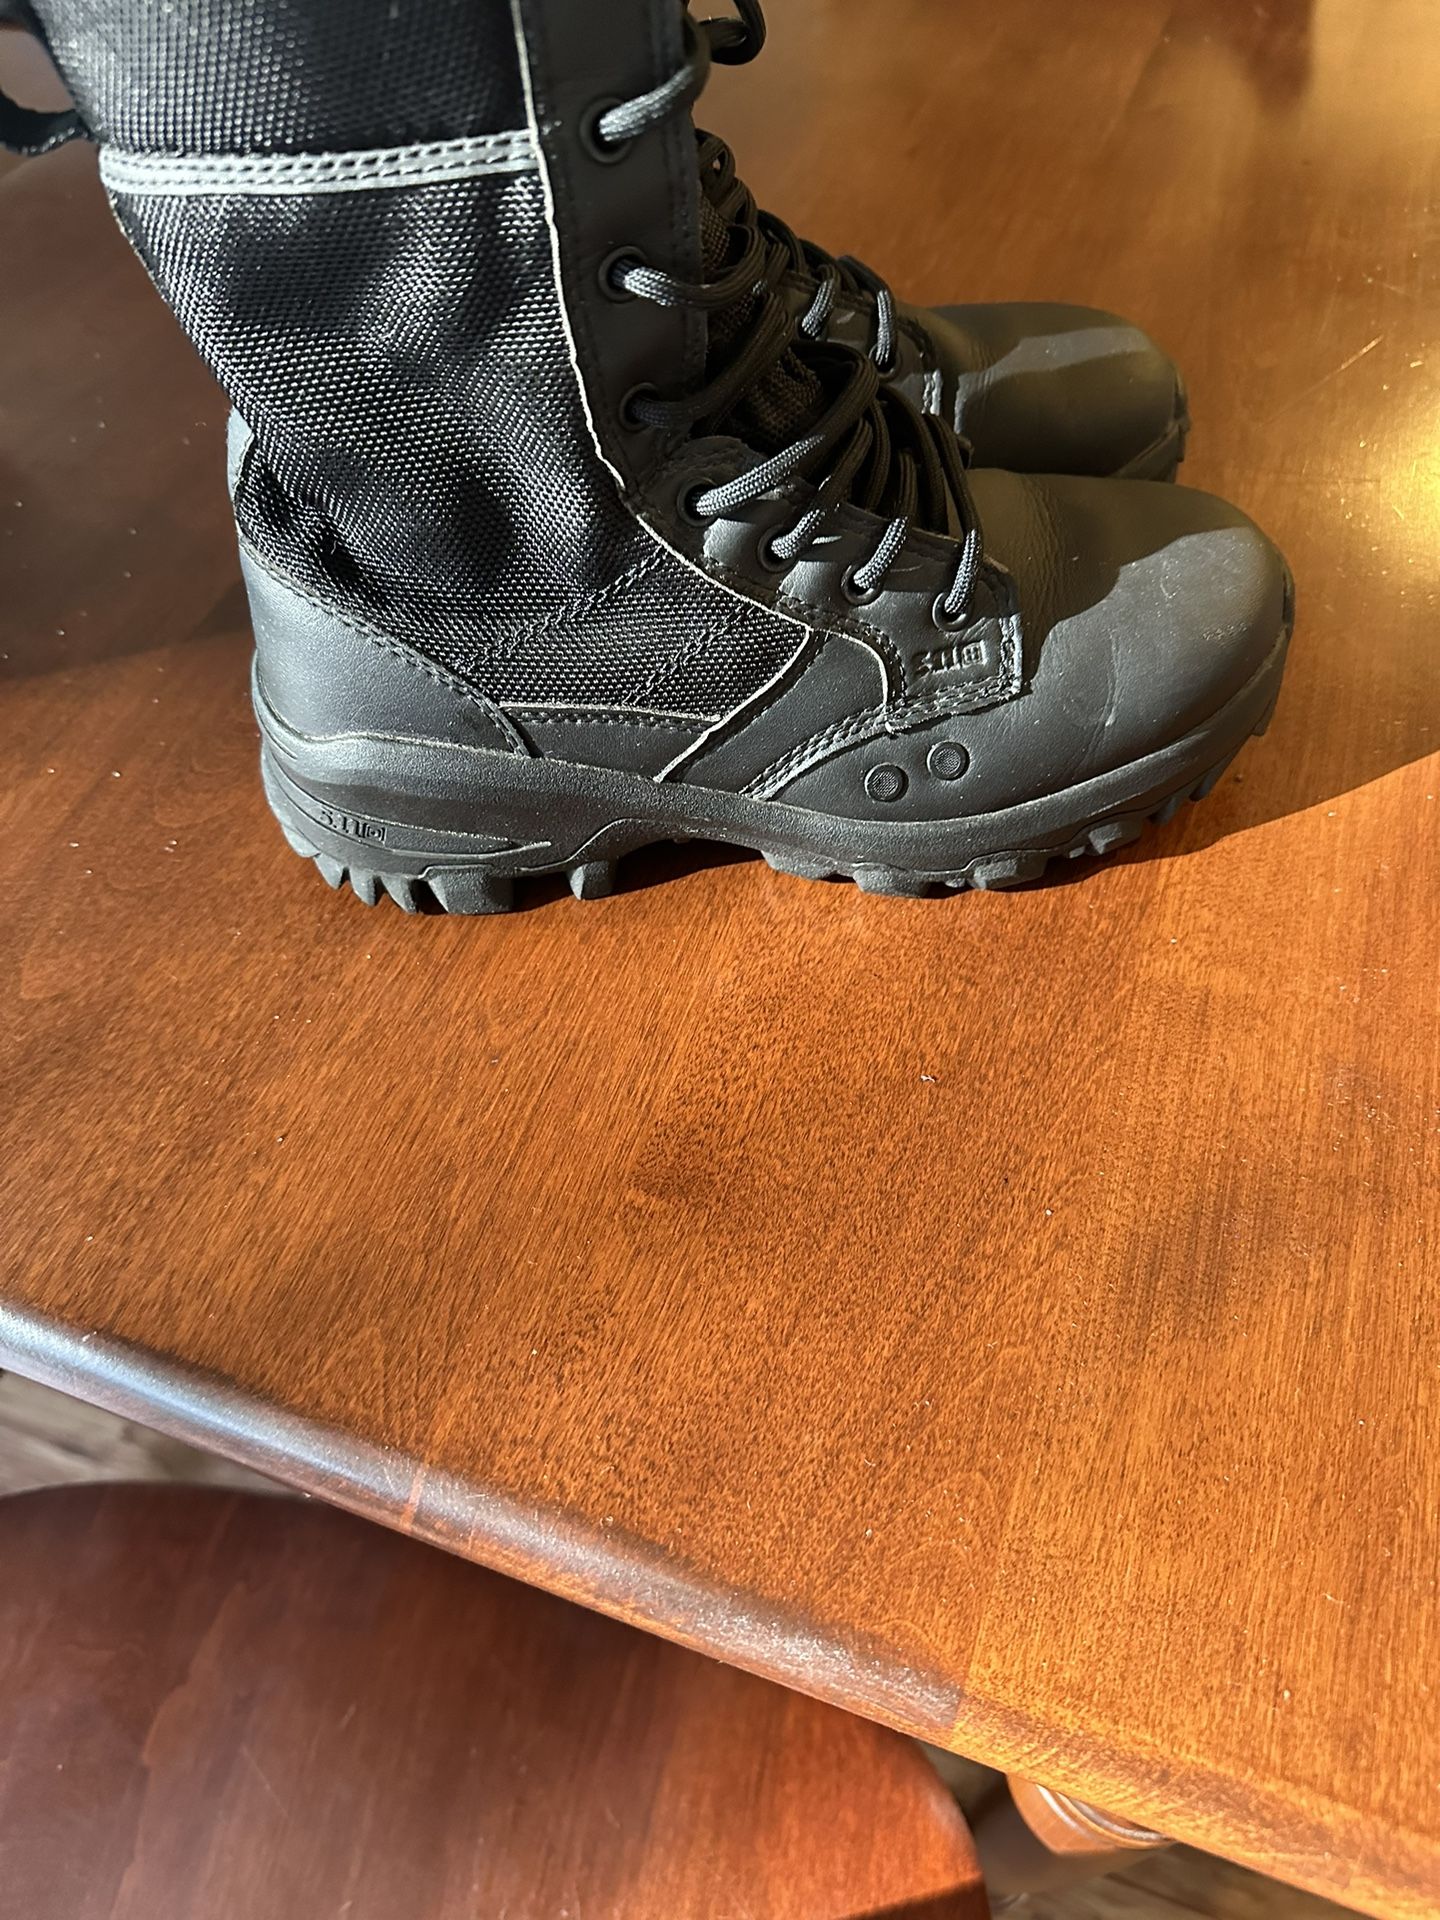 5.11 Tactical Speed 3.0 Jungle Boot